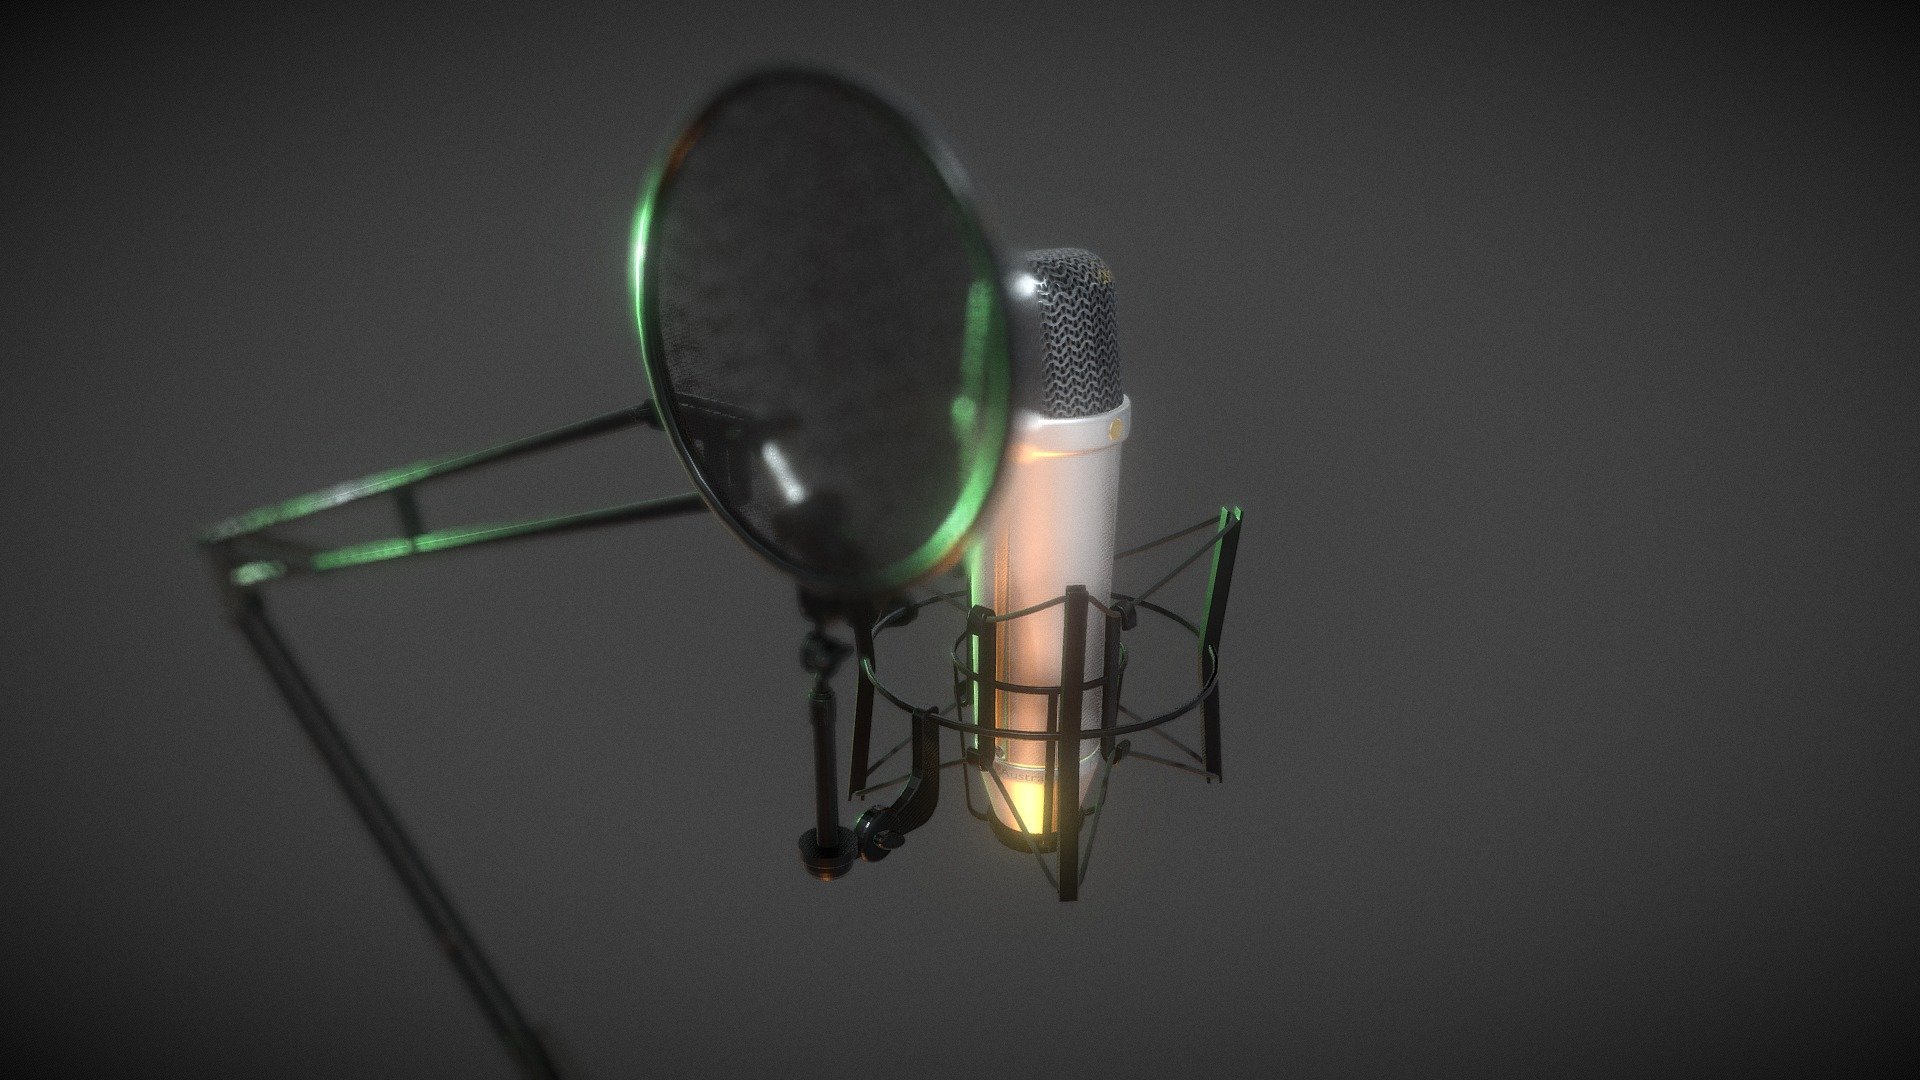 Rode NT1-A Microphone 3D model